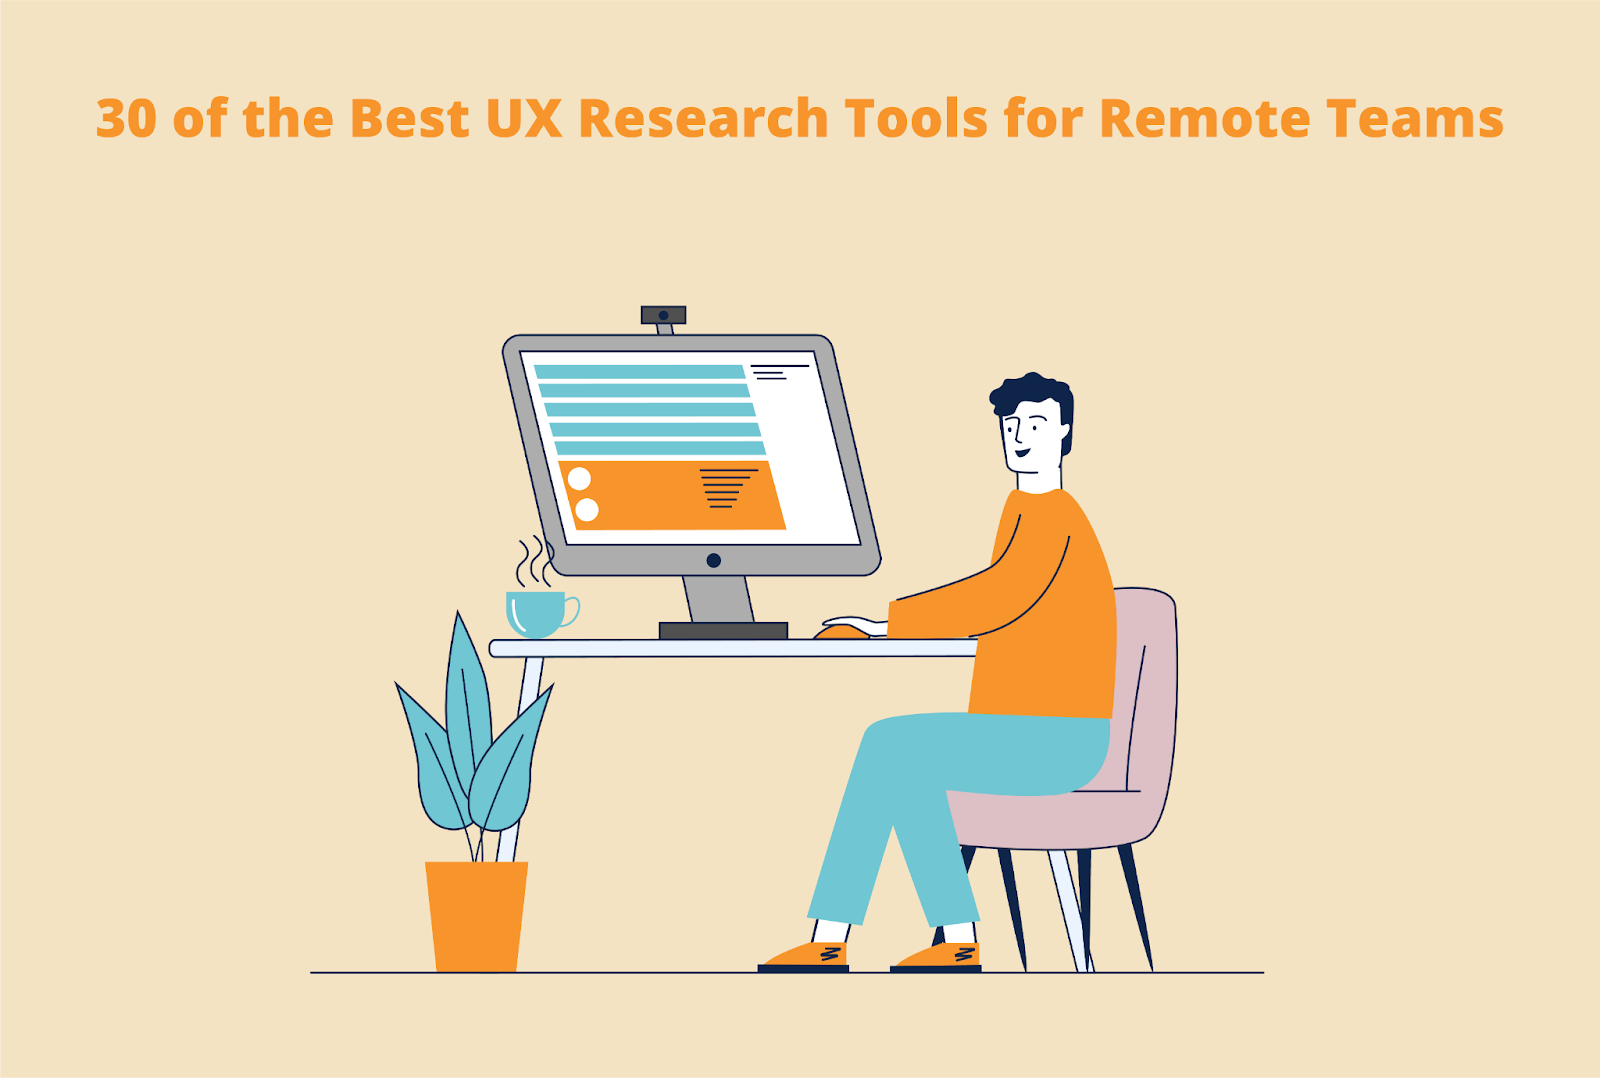 UX research tools